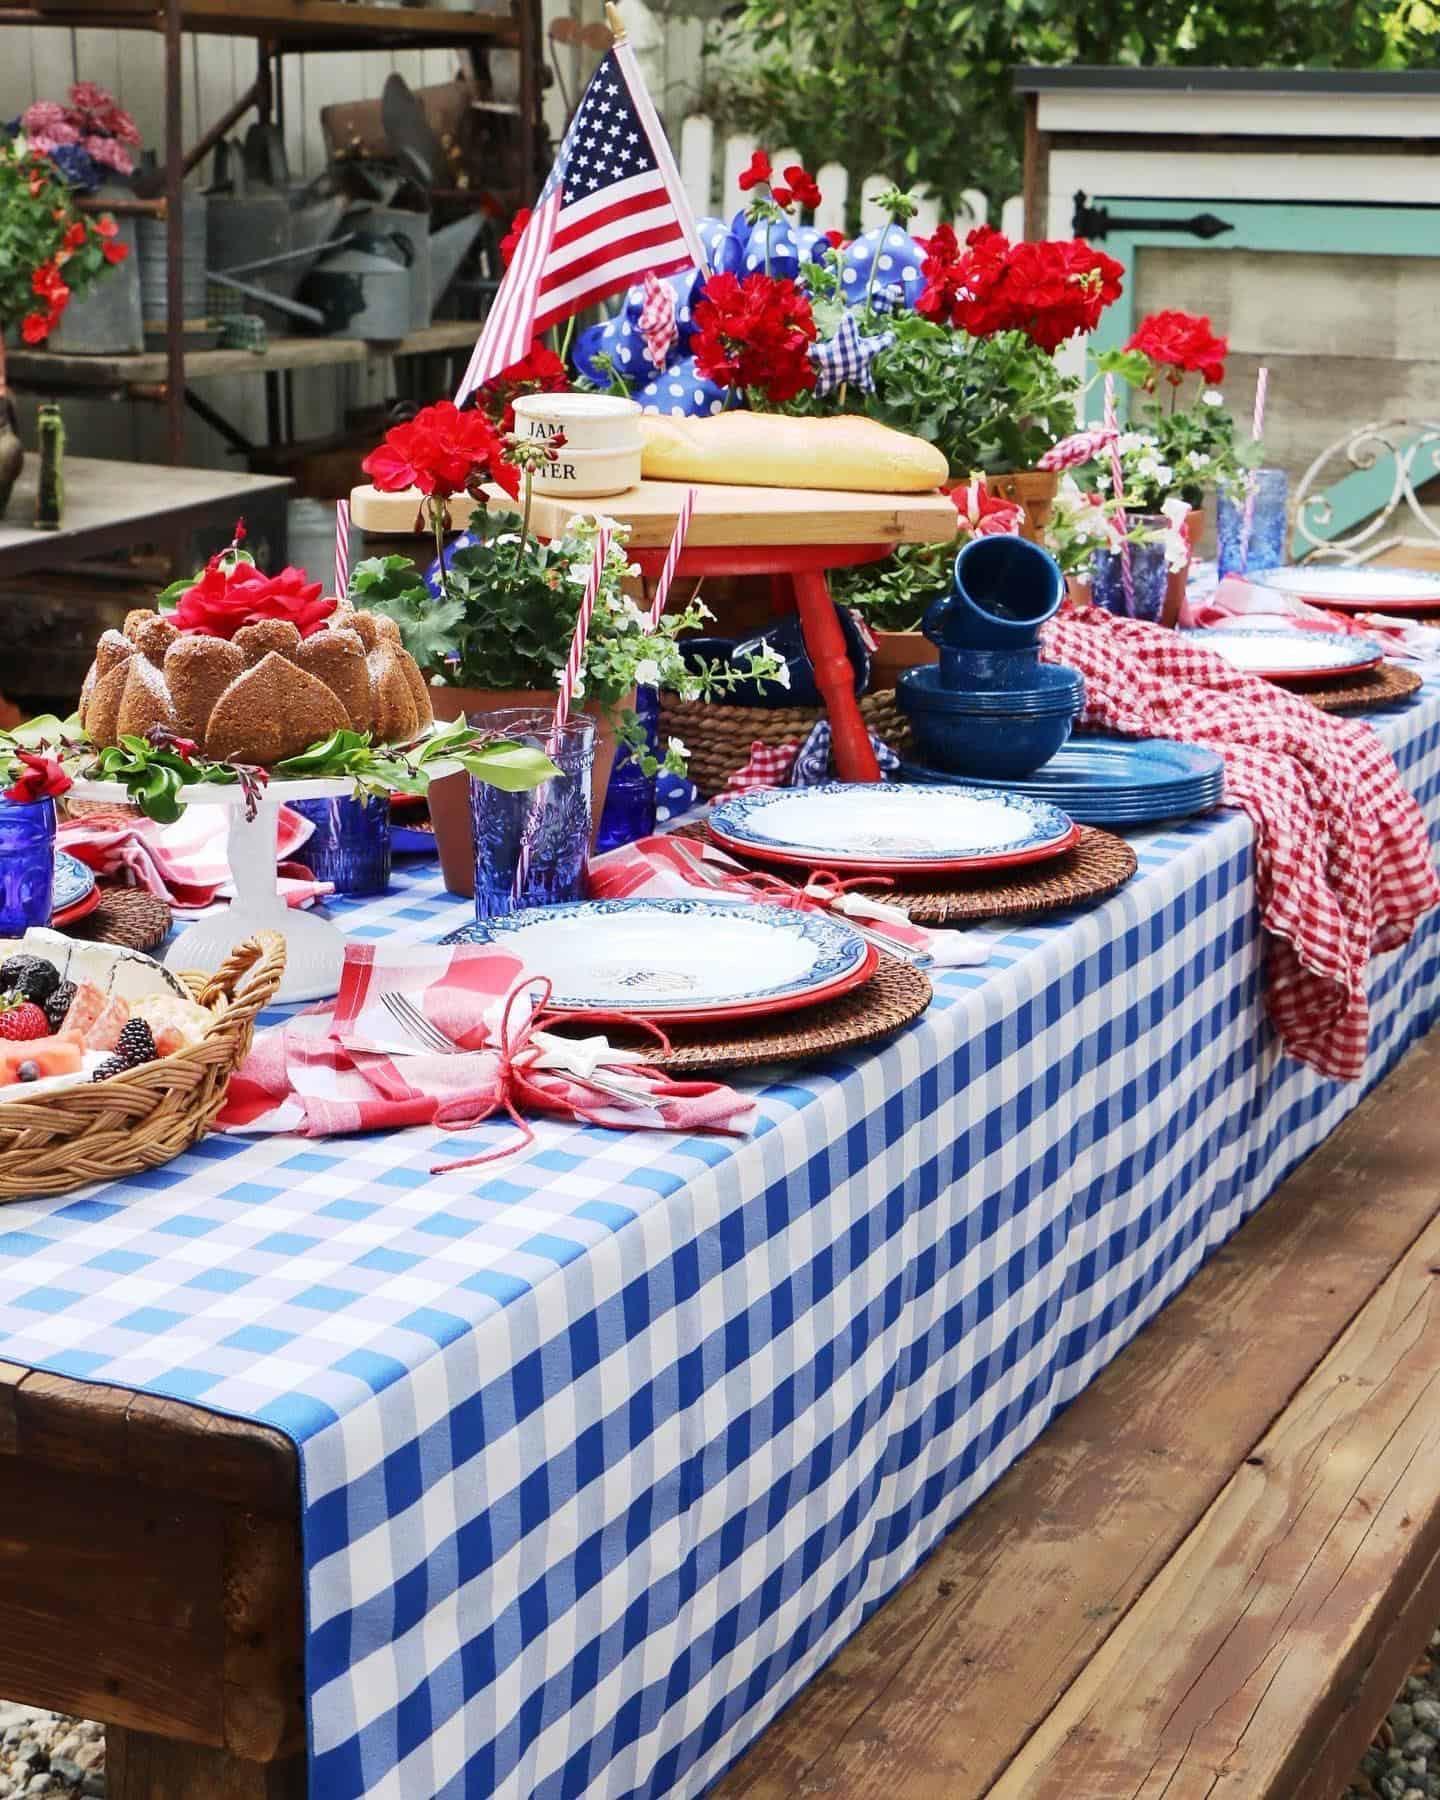 Sharing from the She Shed: Easy Memorial Day Table Decorations and party ideas for a Patriotic Party